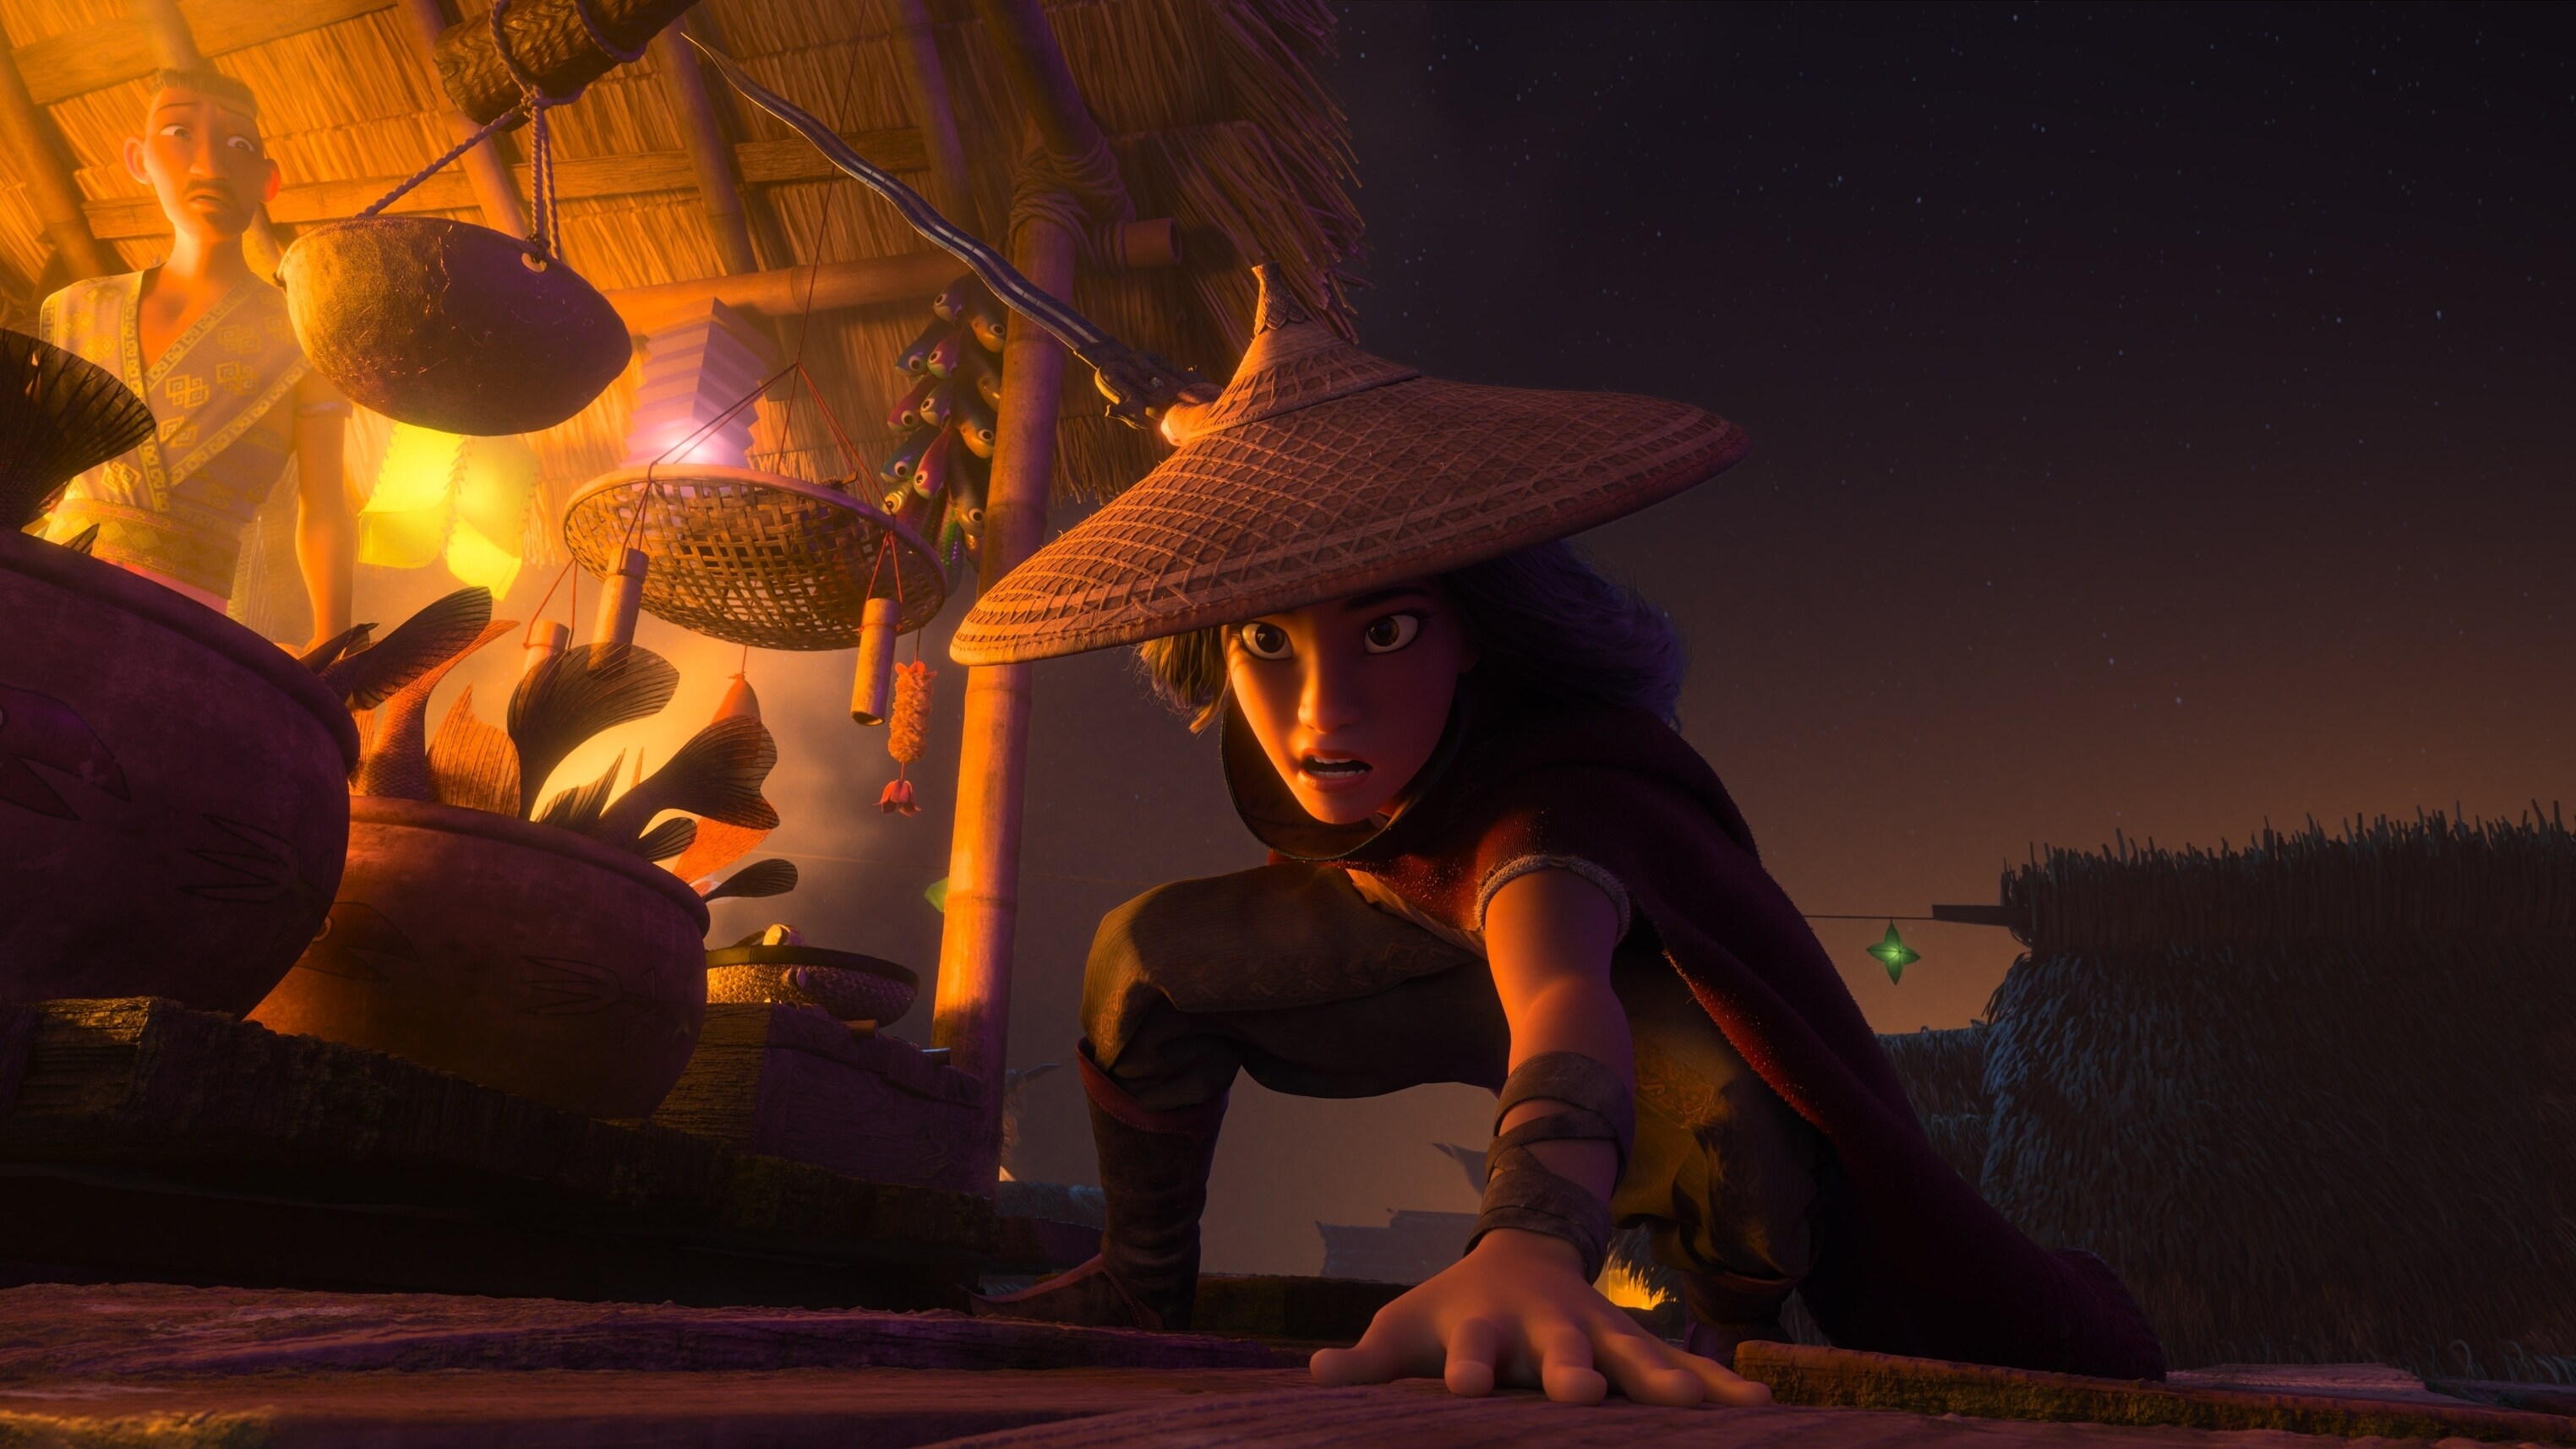 As an evil force threatens the kingdom of Kumandra, it is up to warrior Raya to leave her Heart Lands home and track down the legendary last dragon to help stop the villainous Druun. © 2020 Disney. All Rights Reserved.